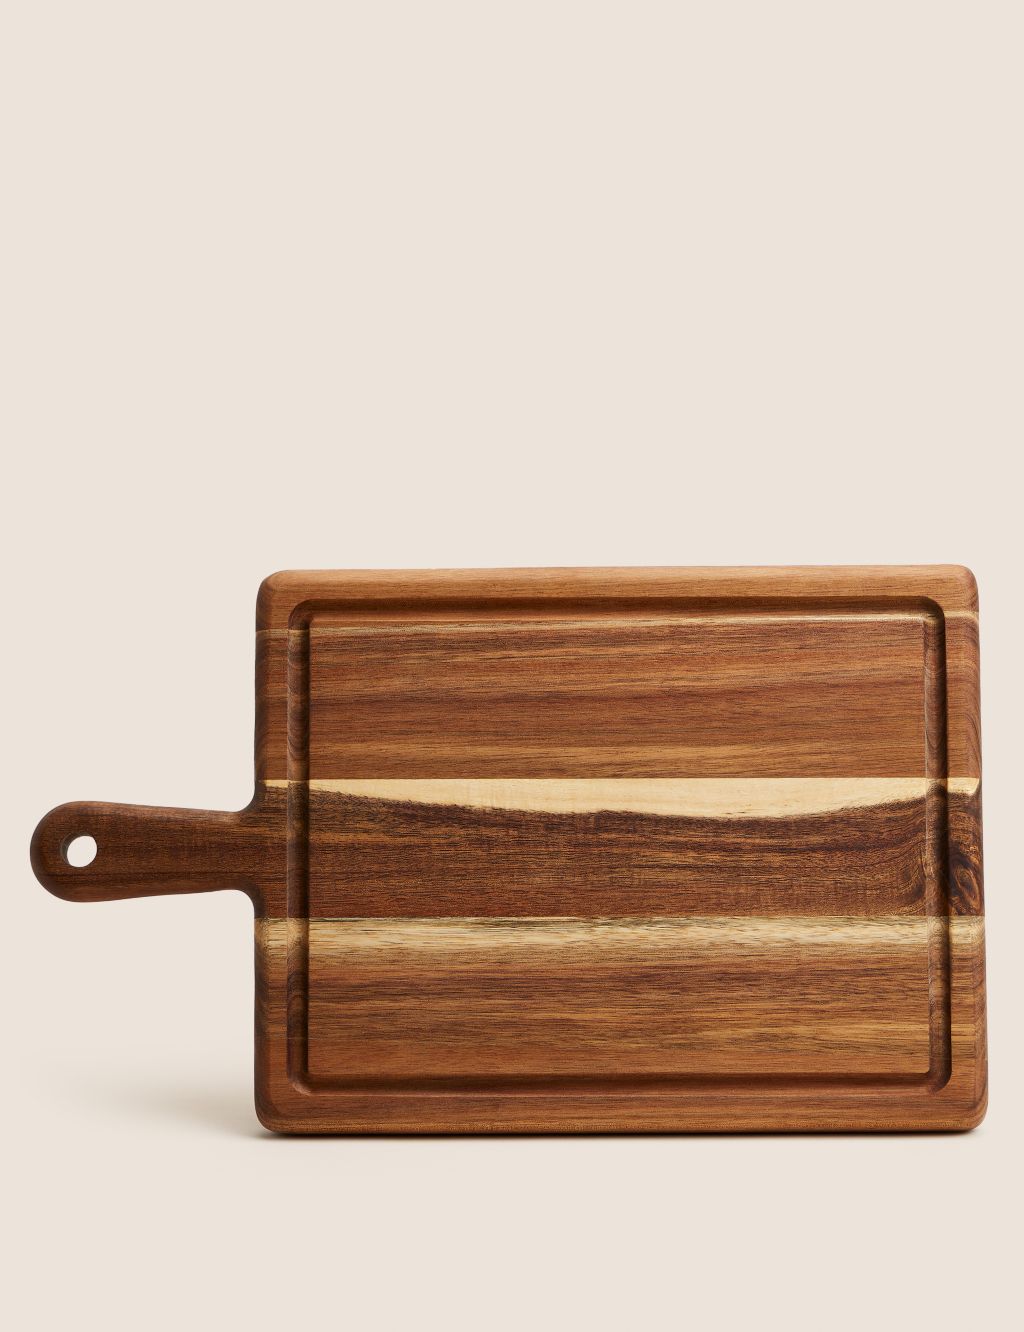 https://asset1.cxnmarksandspencer.com/is/image/mands/Acacia-Chopping-Board-with-Handle/PL_05_T34_0019X_YM_X_EC_0?$PDP_IMAGEGRID$&wid=1024&qlt=80